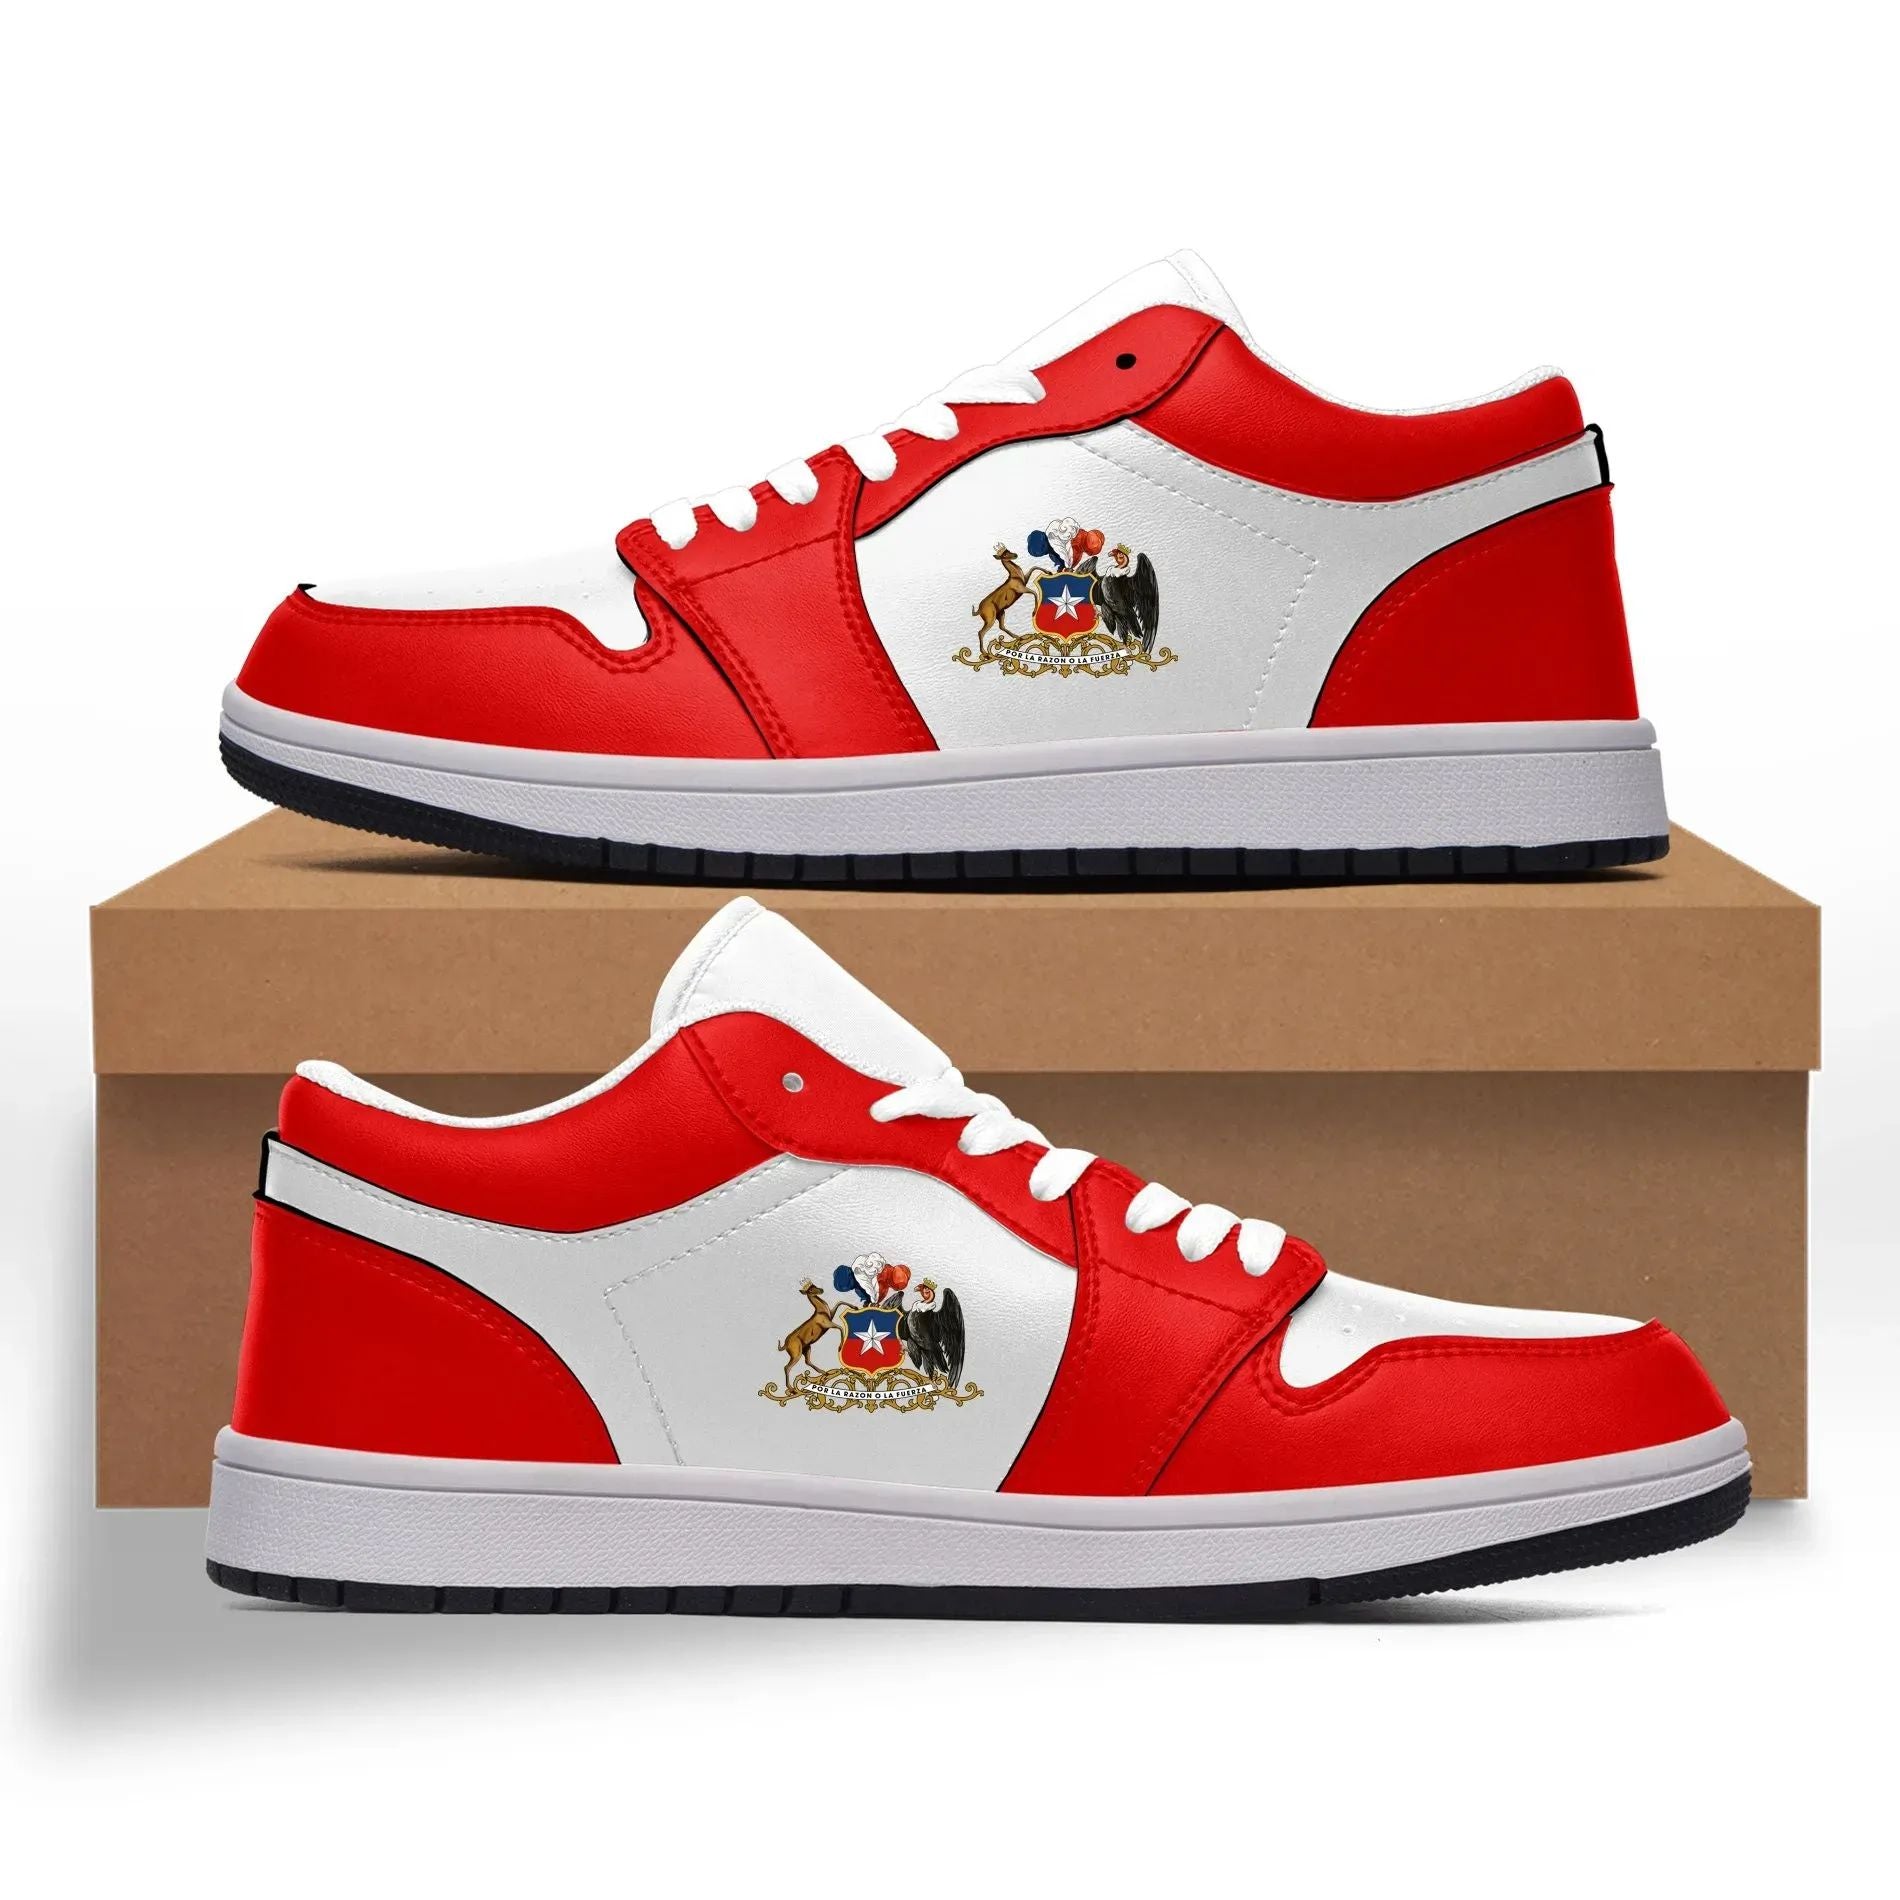 chile-special-version-low-gym-red-white-sneakers